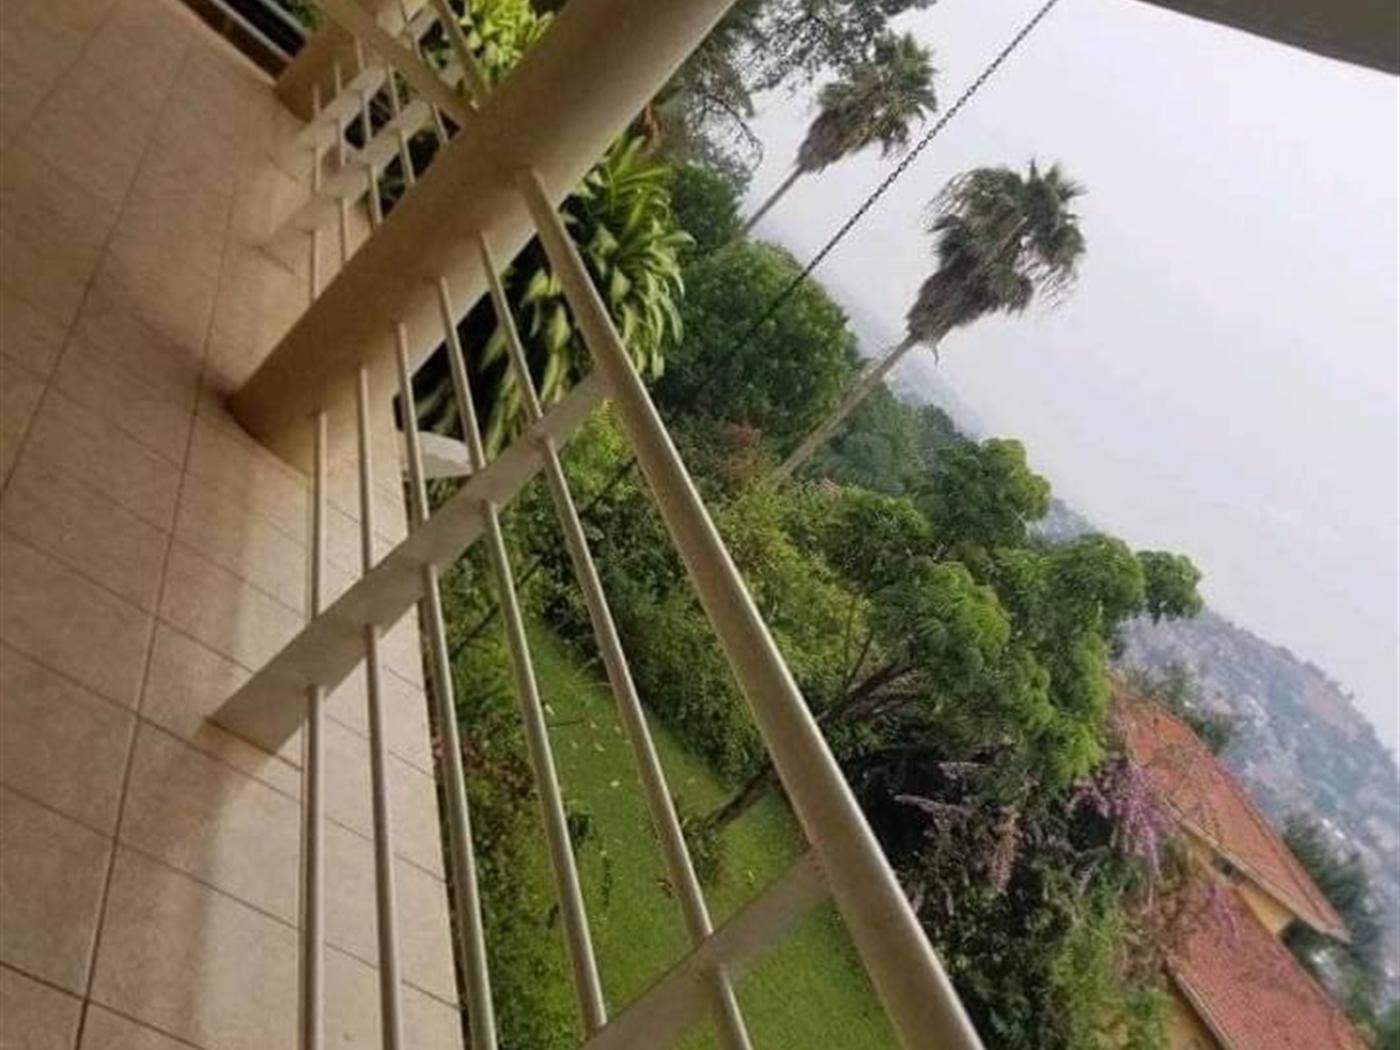 Storeyed house for rent in Mbuya Kampala